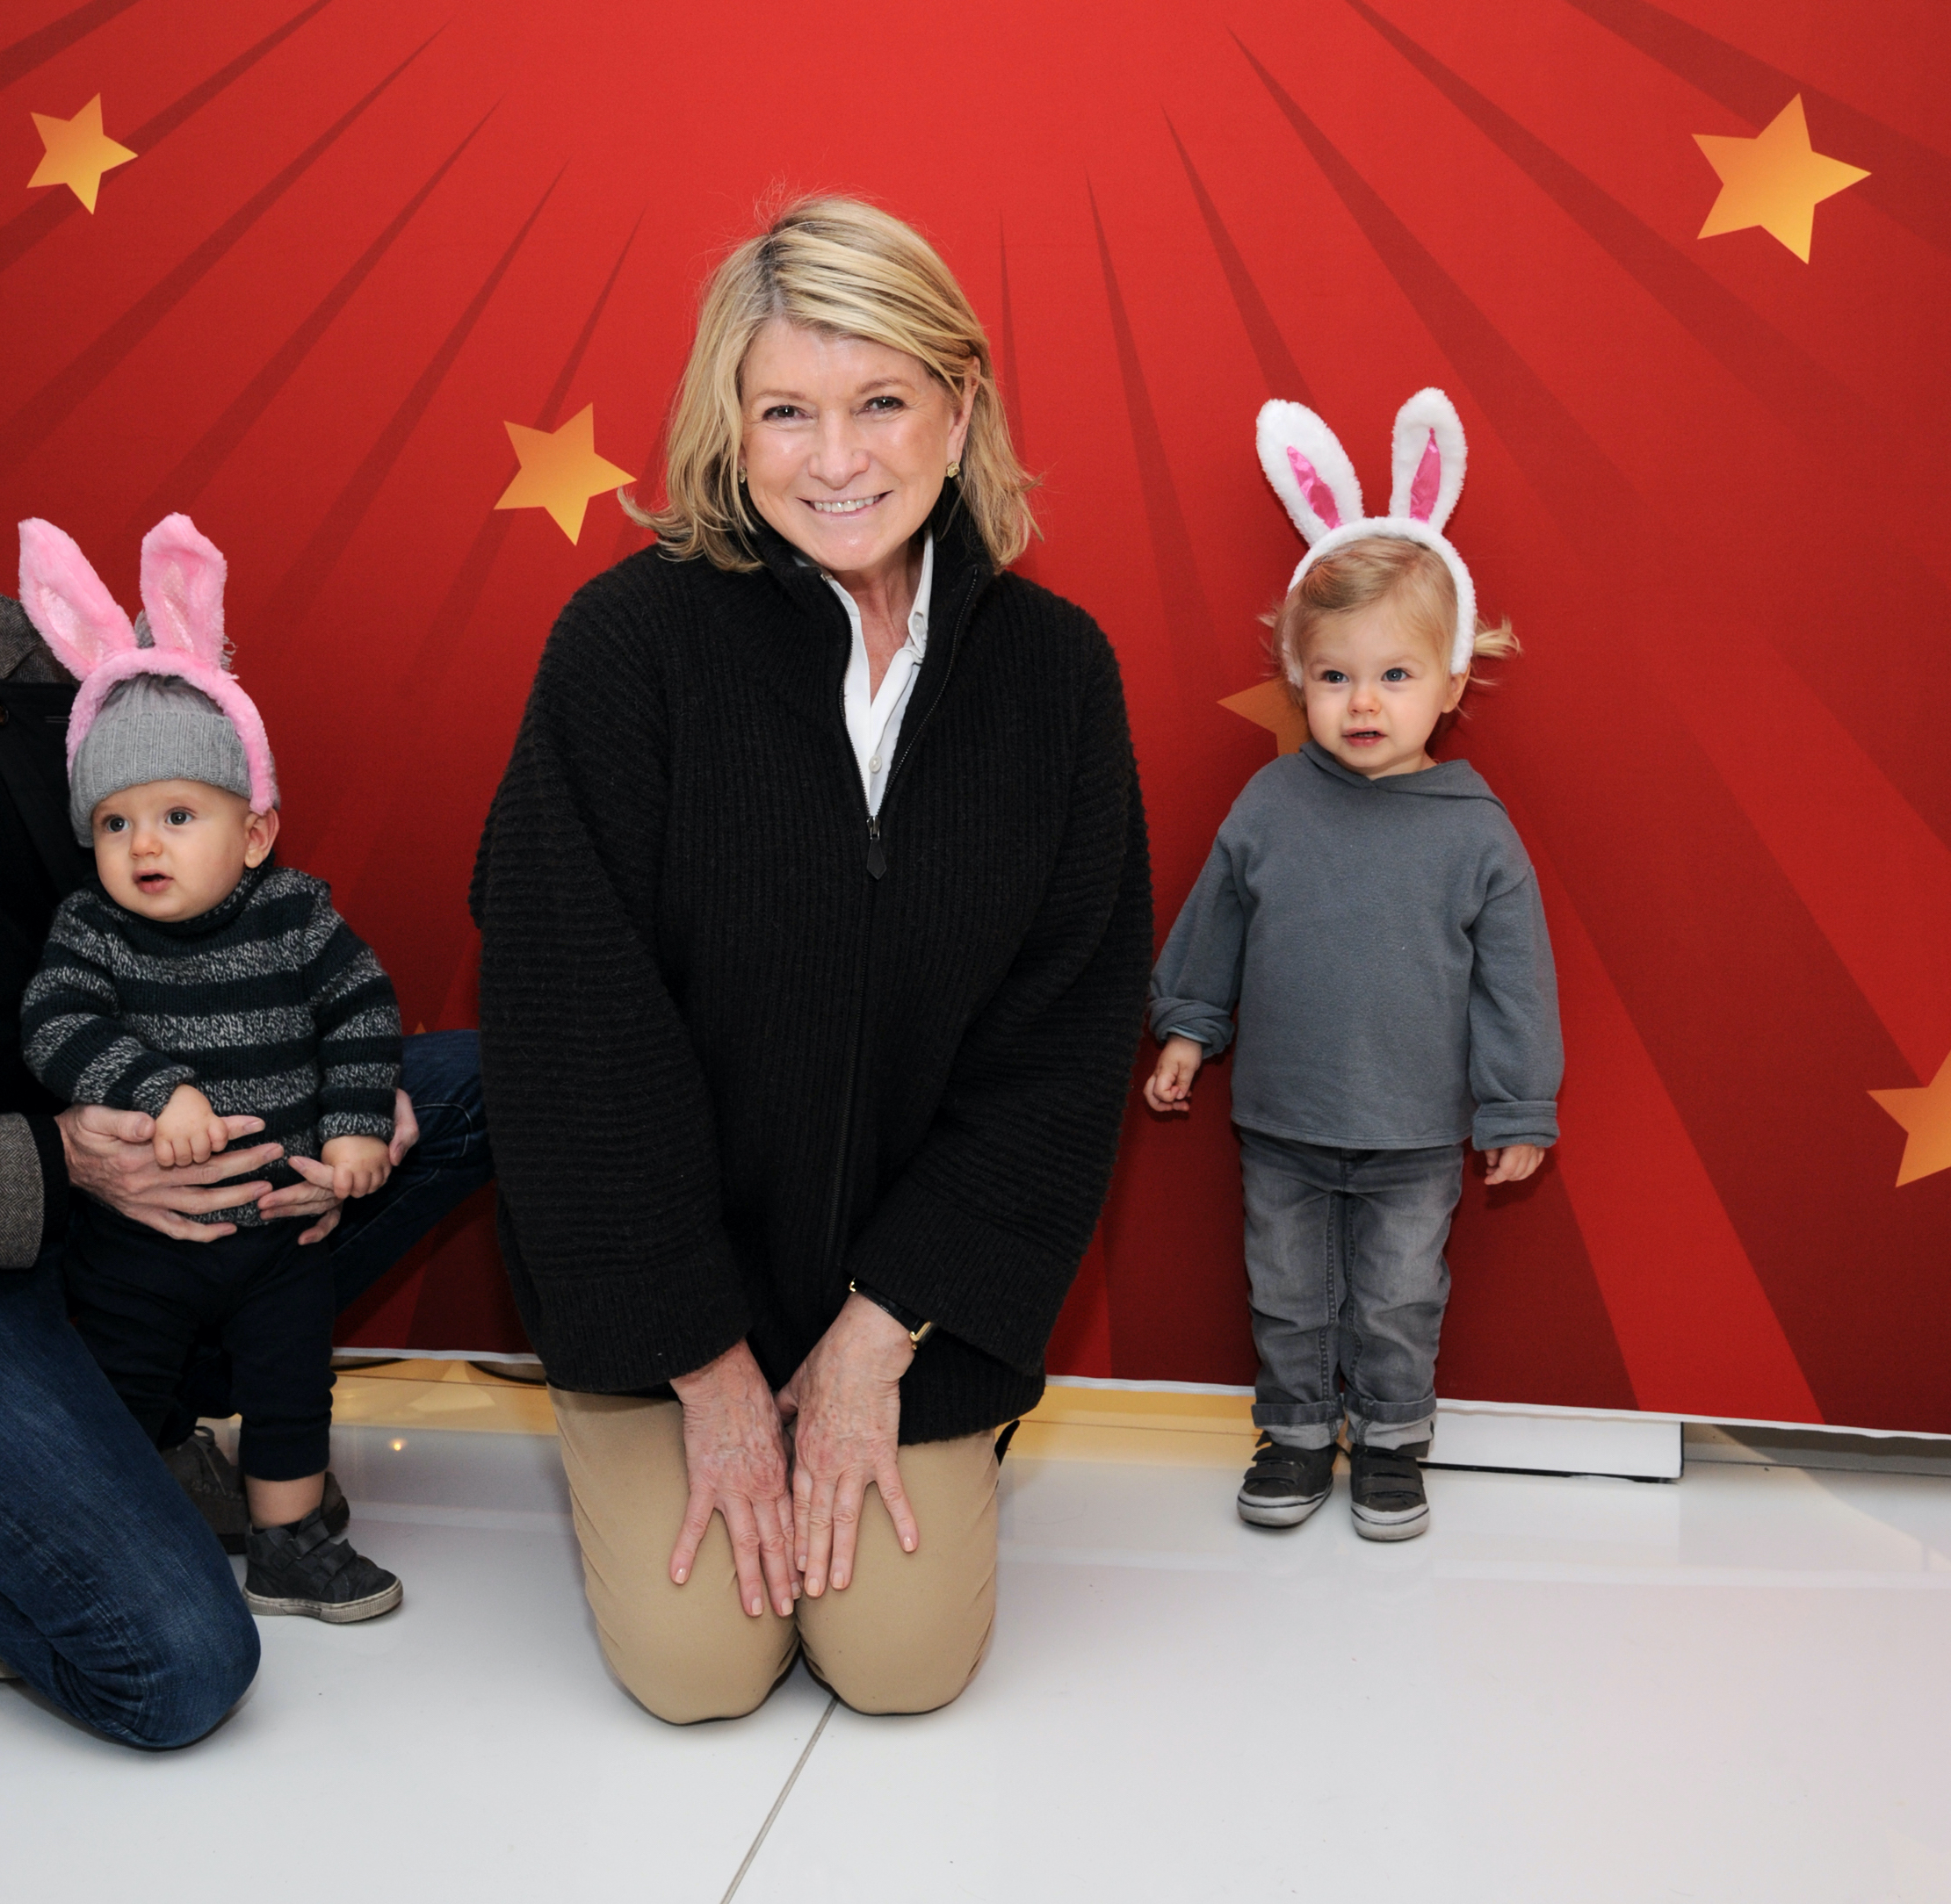 Martha Stewart Attends Ringling Bros. and Barnum & Bailey “Built To Amaze!” At Barclays Center, Brooklyn, NY